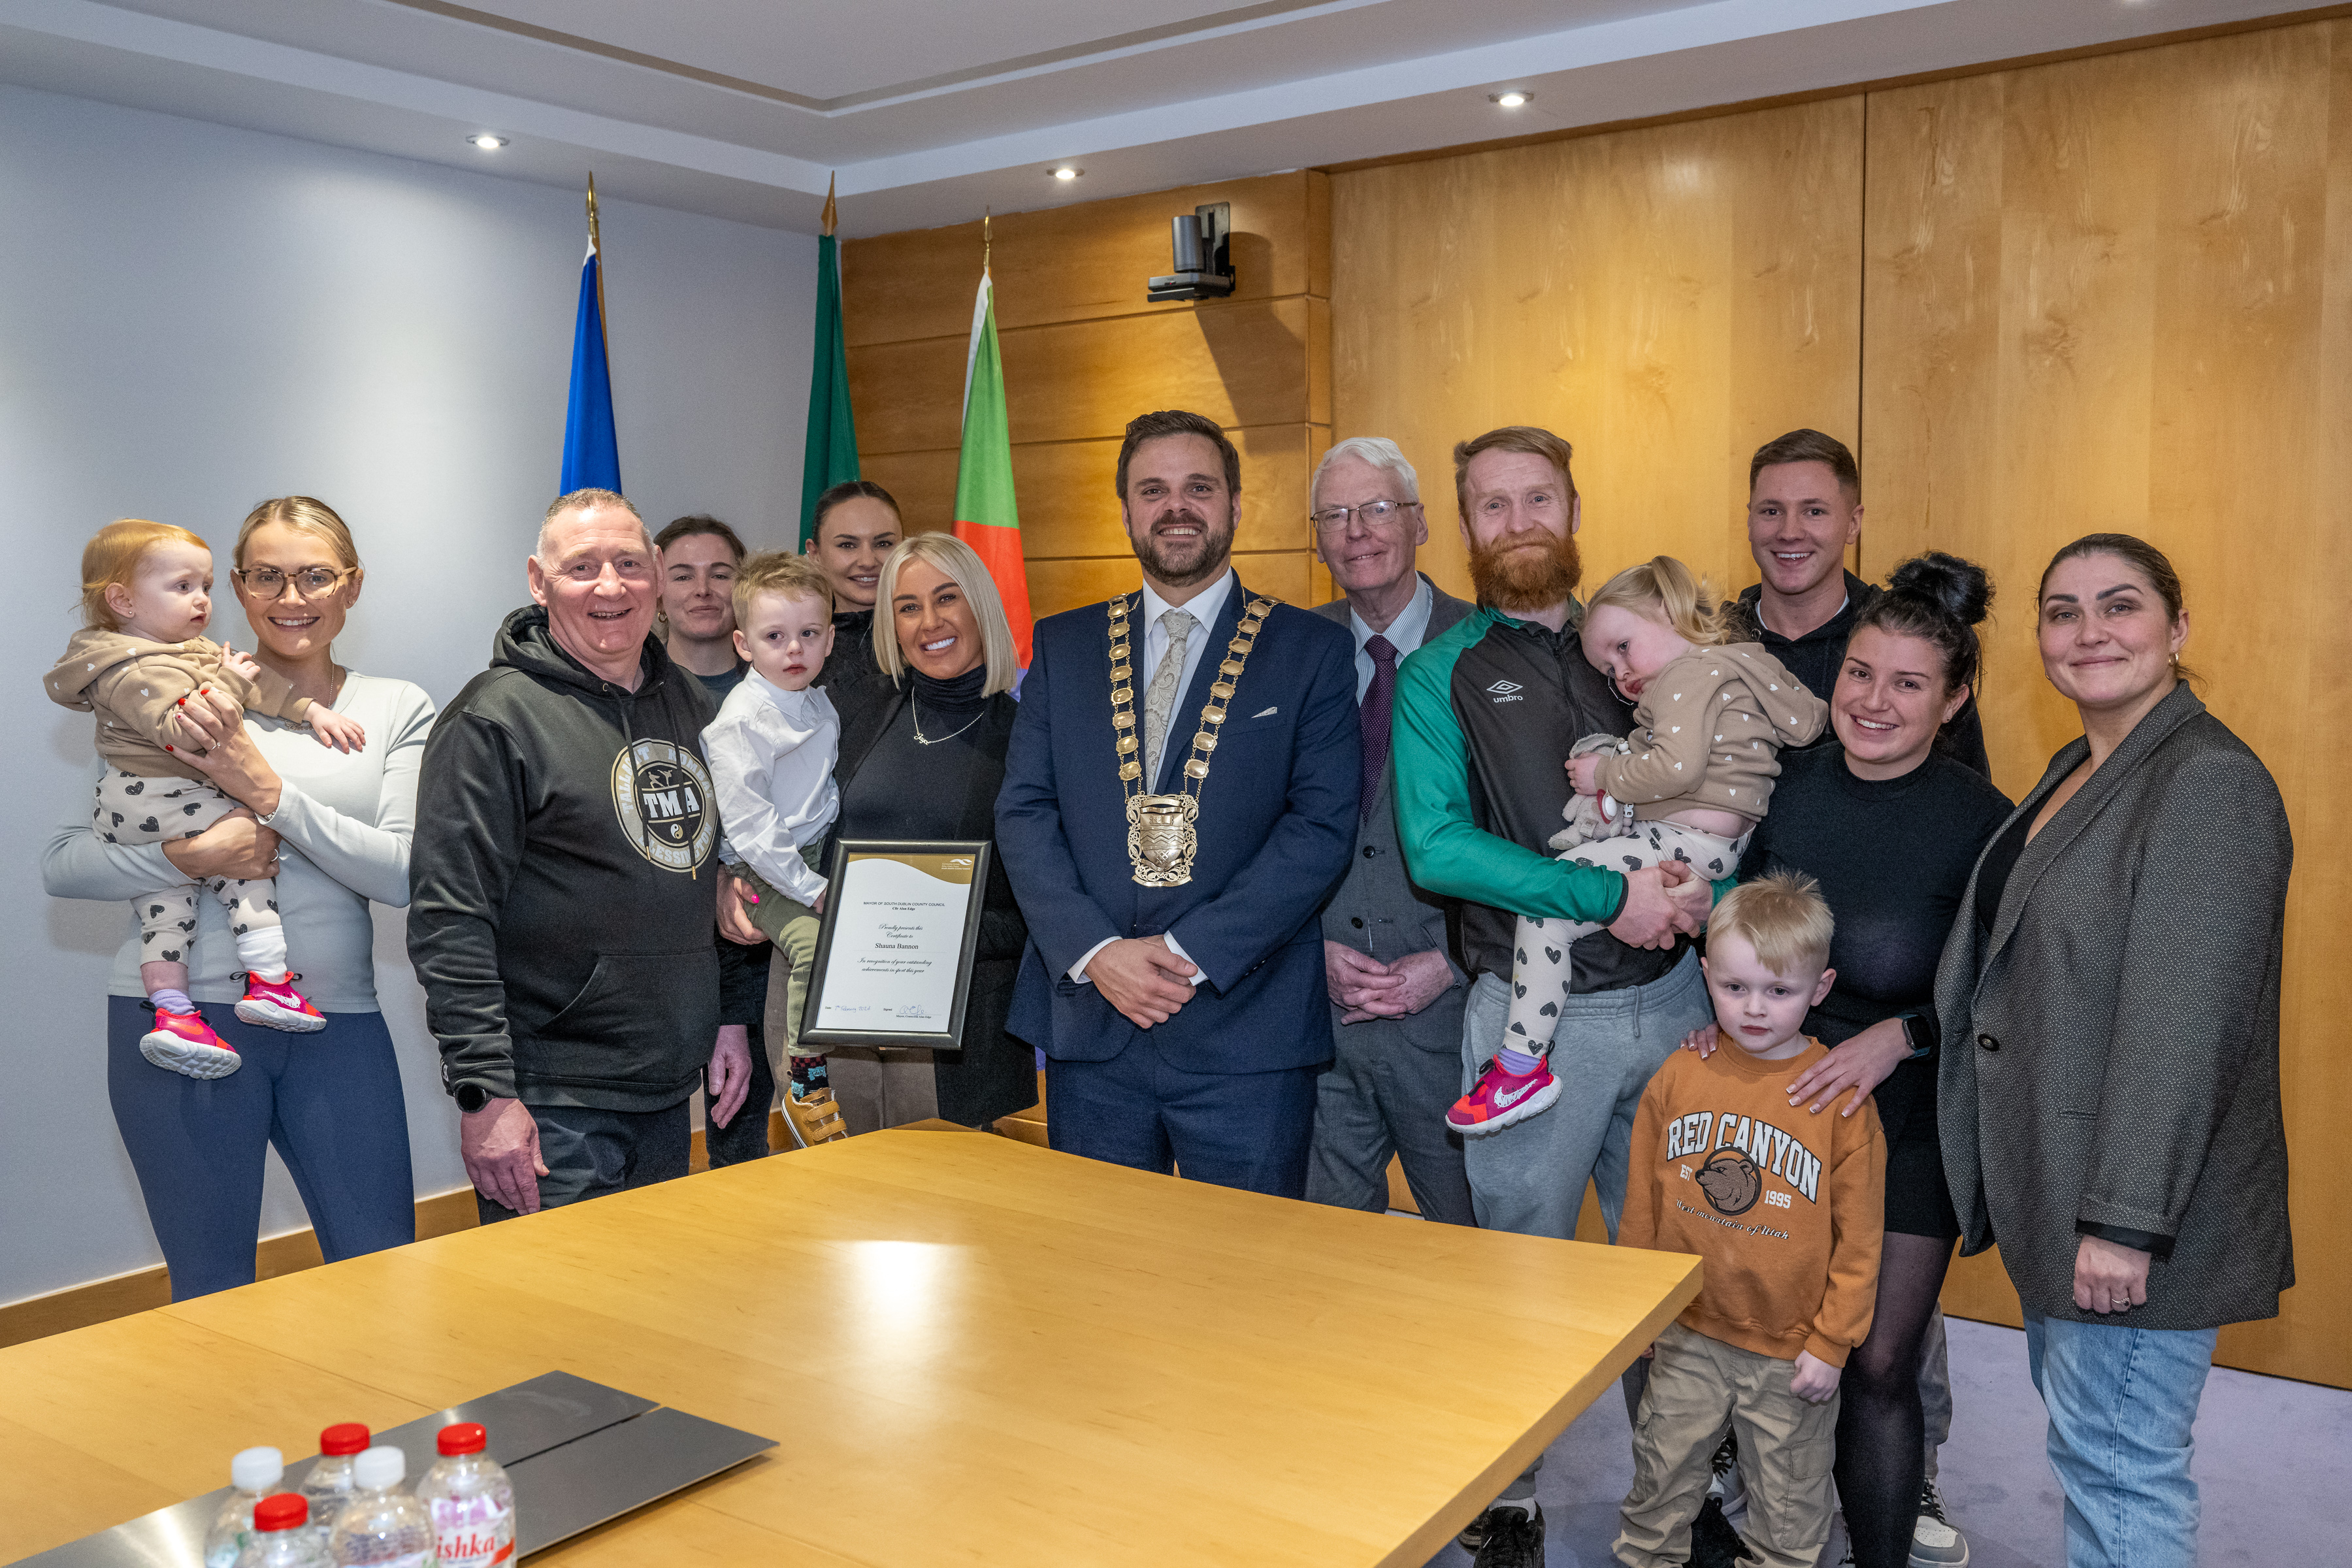 Mayor’s-reception-for-Shauna-Bannon-who-won-UFC-title-in-Las-Vegas-recently